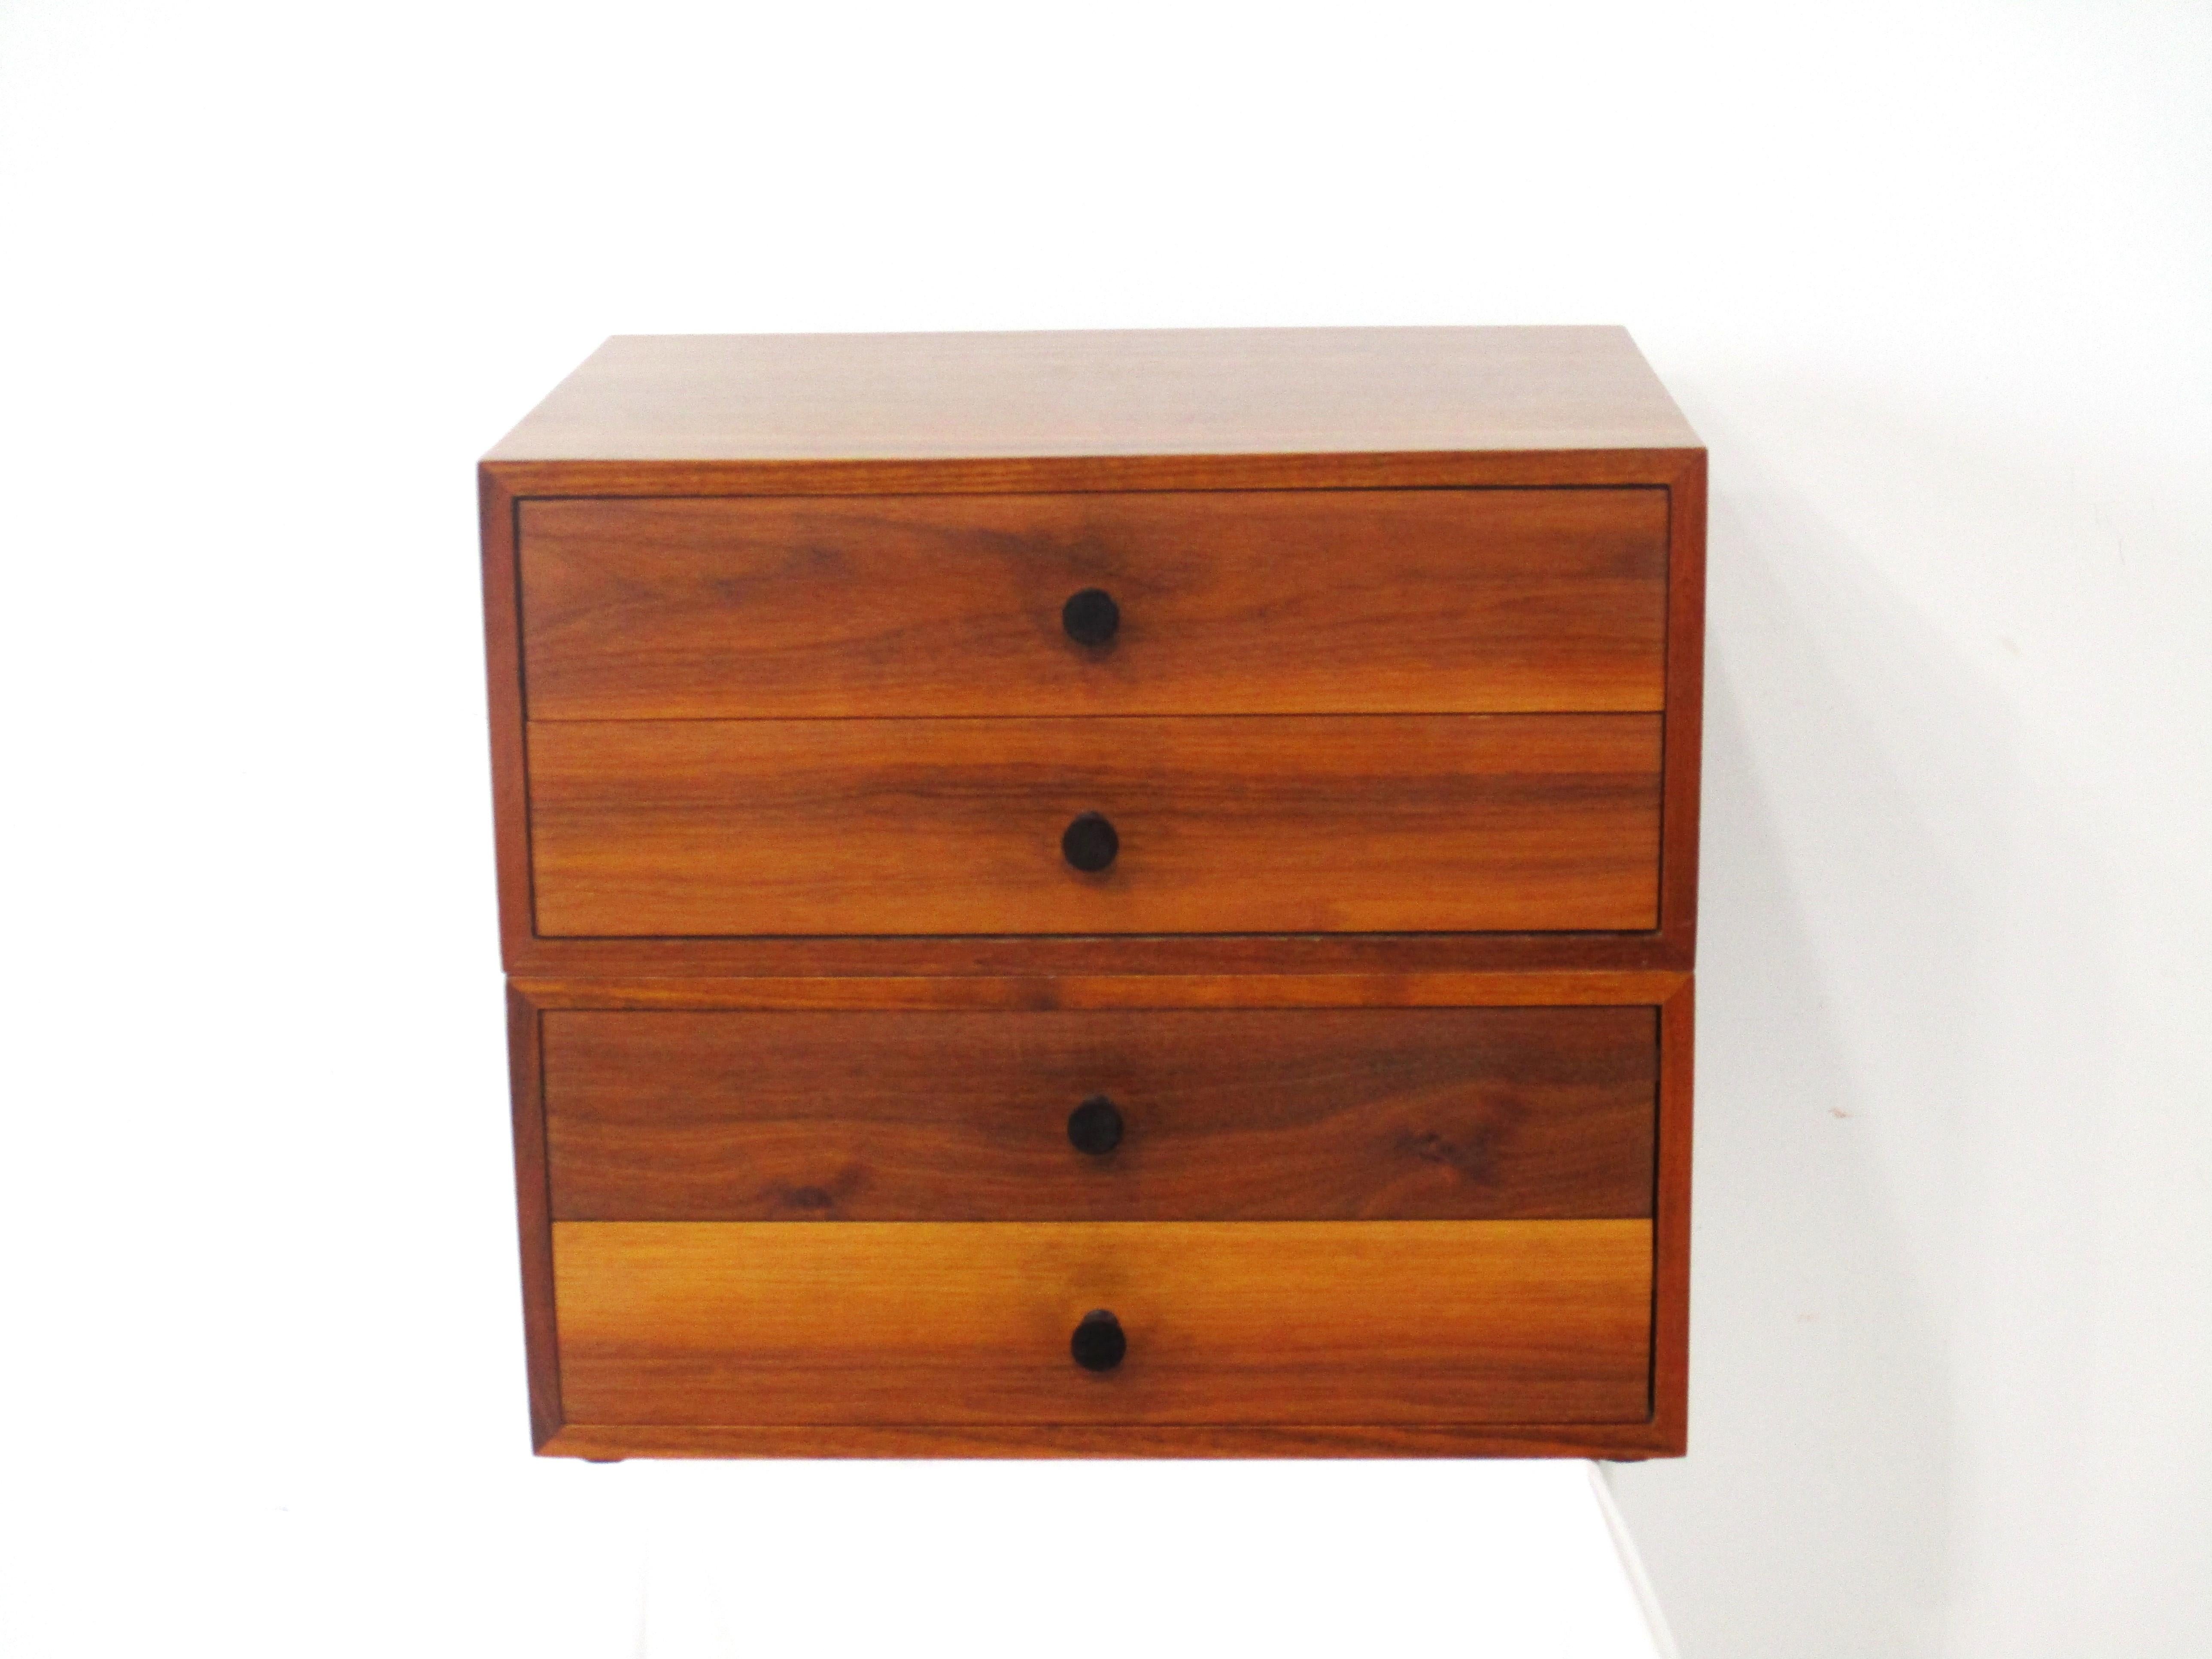 A very well crafted walnut four drawer jewelry or watch box with wonderful graining which sits on your dresser or in your dressing area . To the front of the drawers are dark turned rosewood pulls giving the piece a rich tailored look , Made in